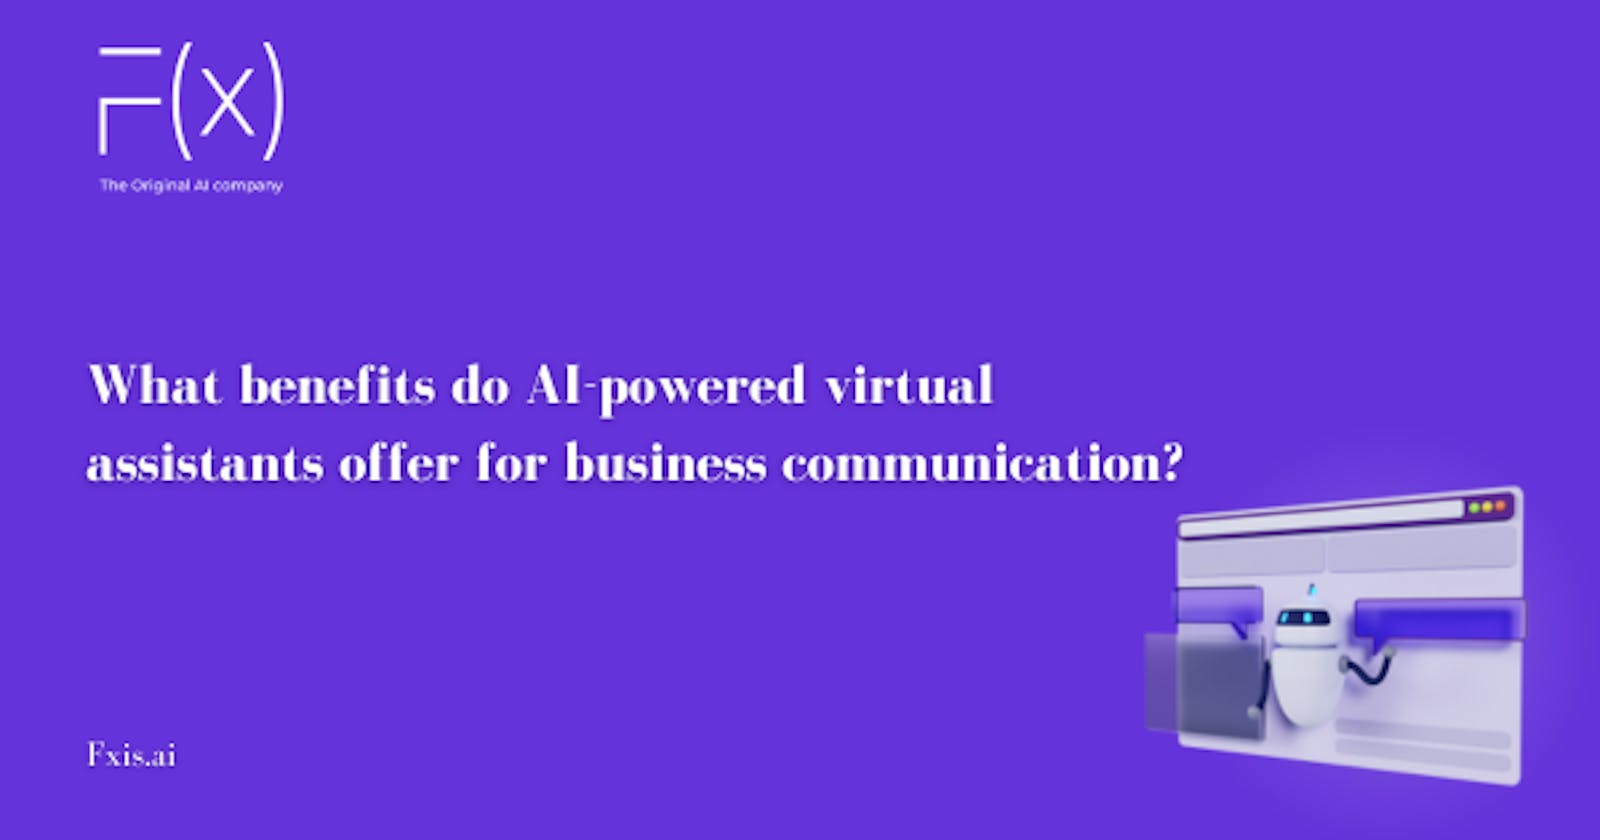 What benefits do AI-powered virtual assistants offer for business communication?